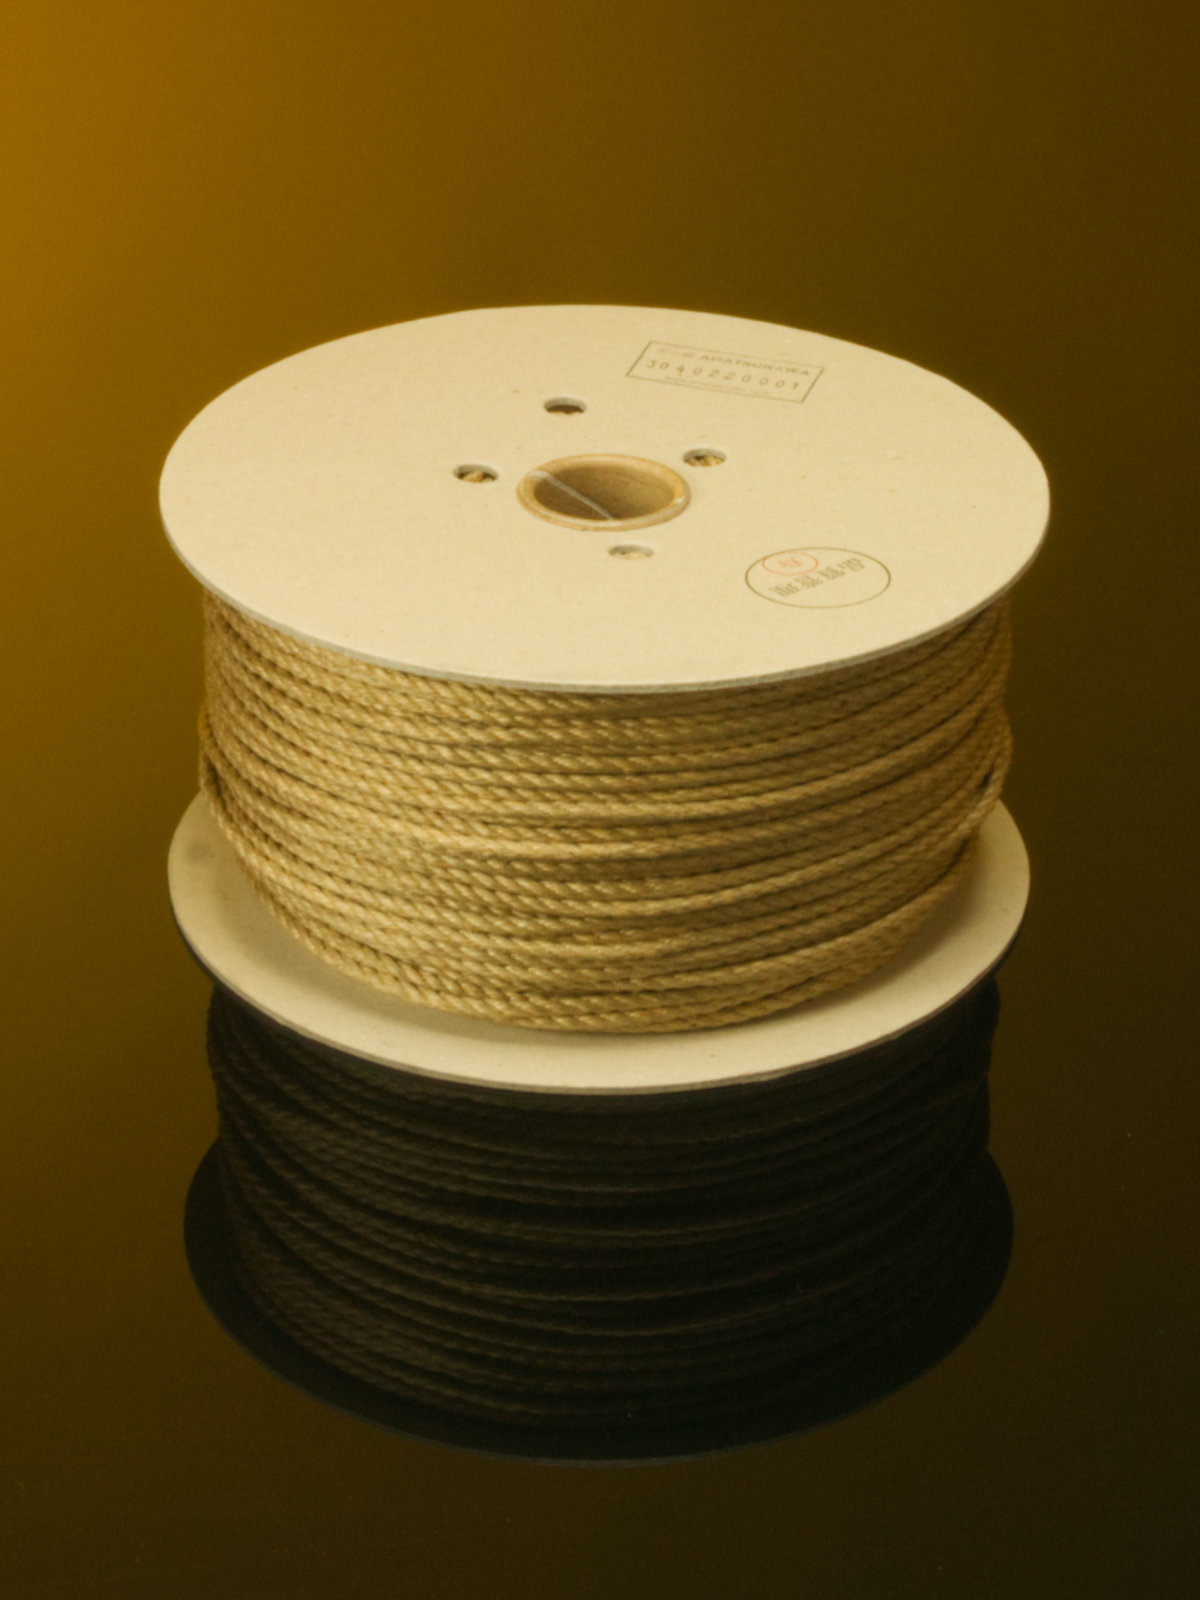 JOUYOKU MIDI-ROLL, ~3kg ready-for-use Japanese-made jute rope, various diameters, JBO-free, new 2023 batch! 